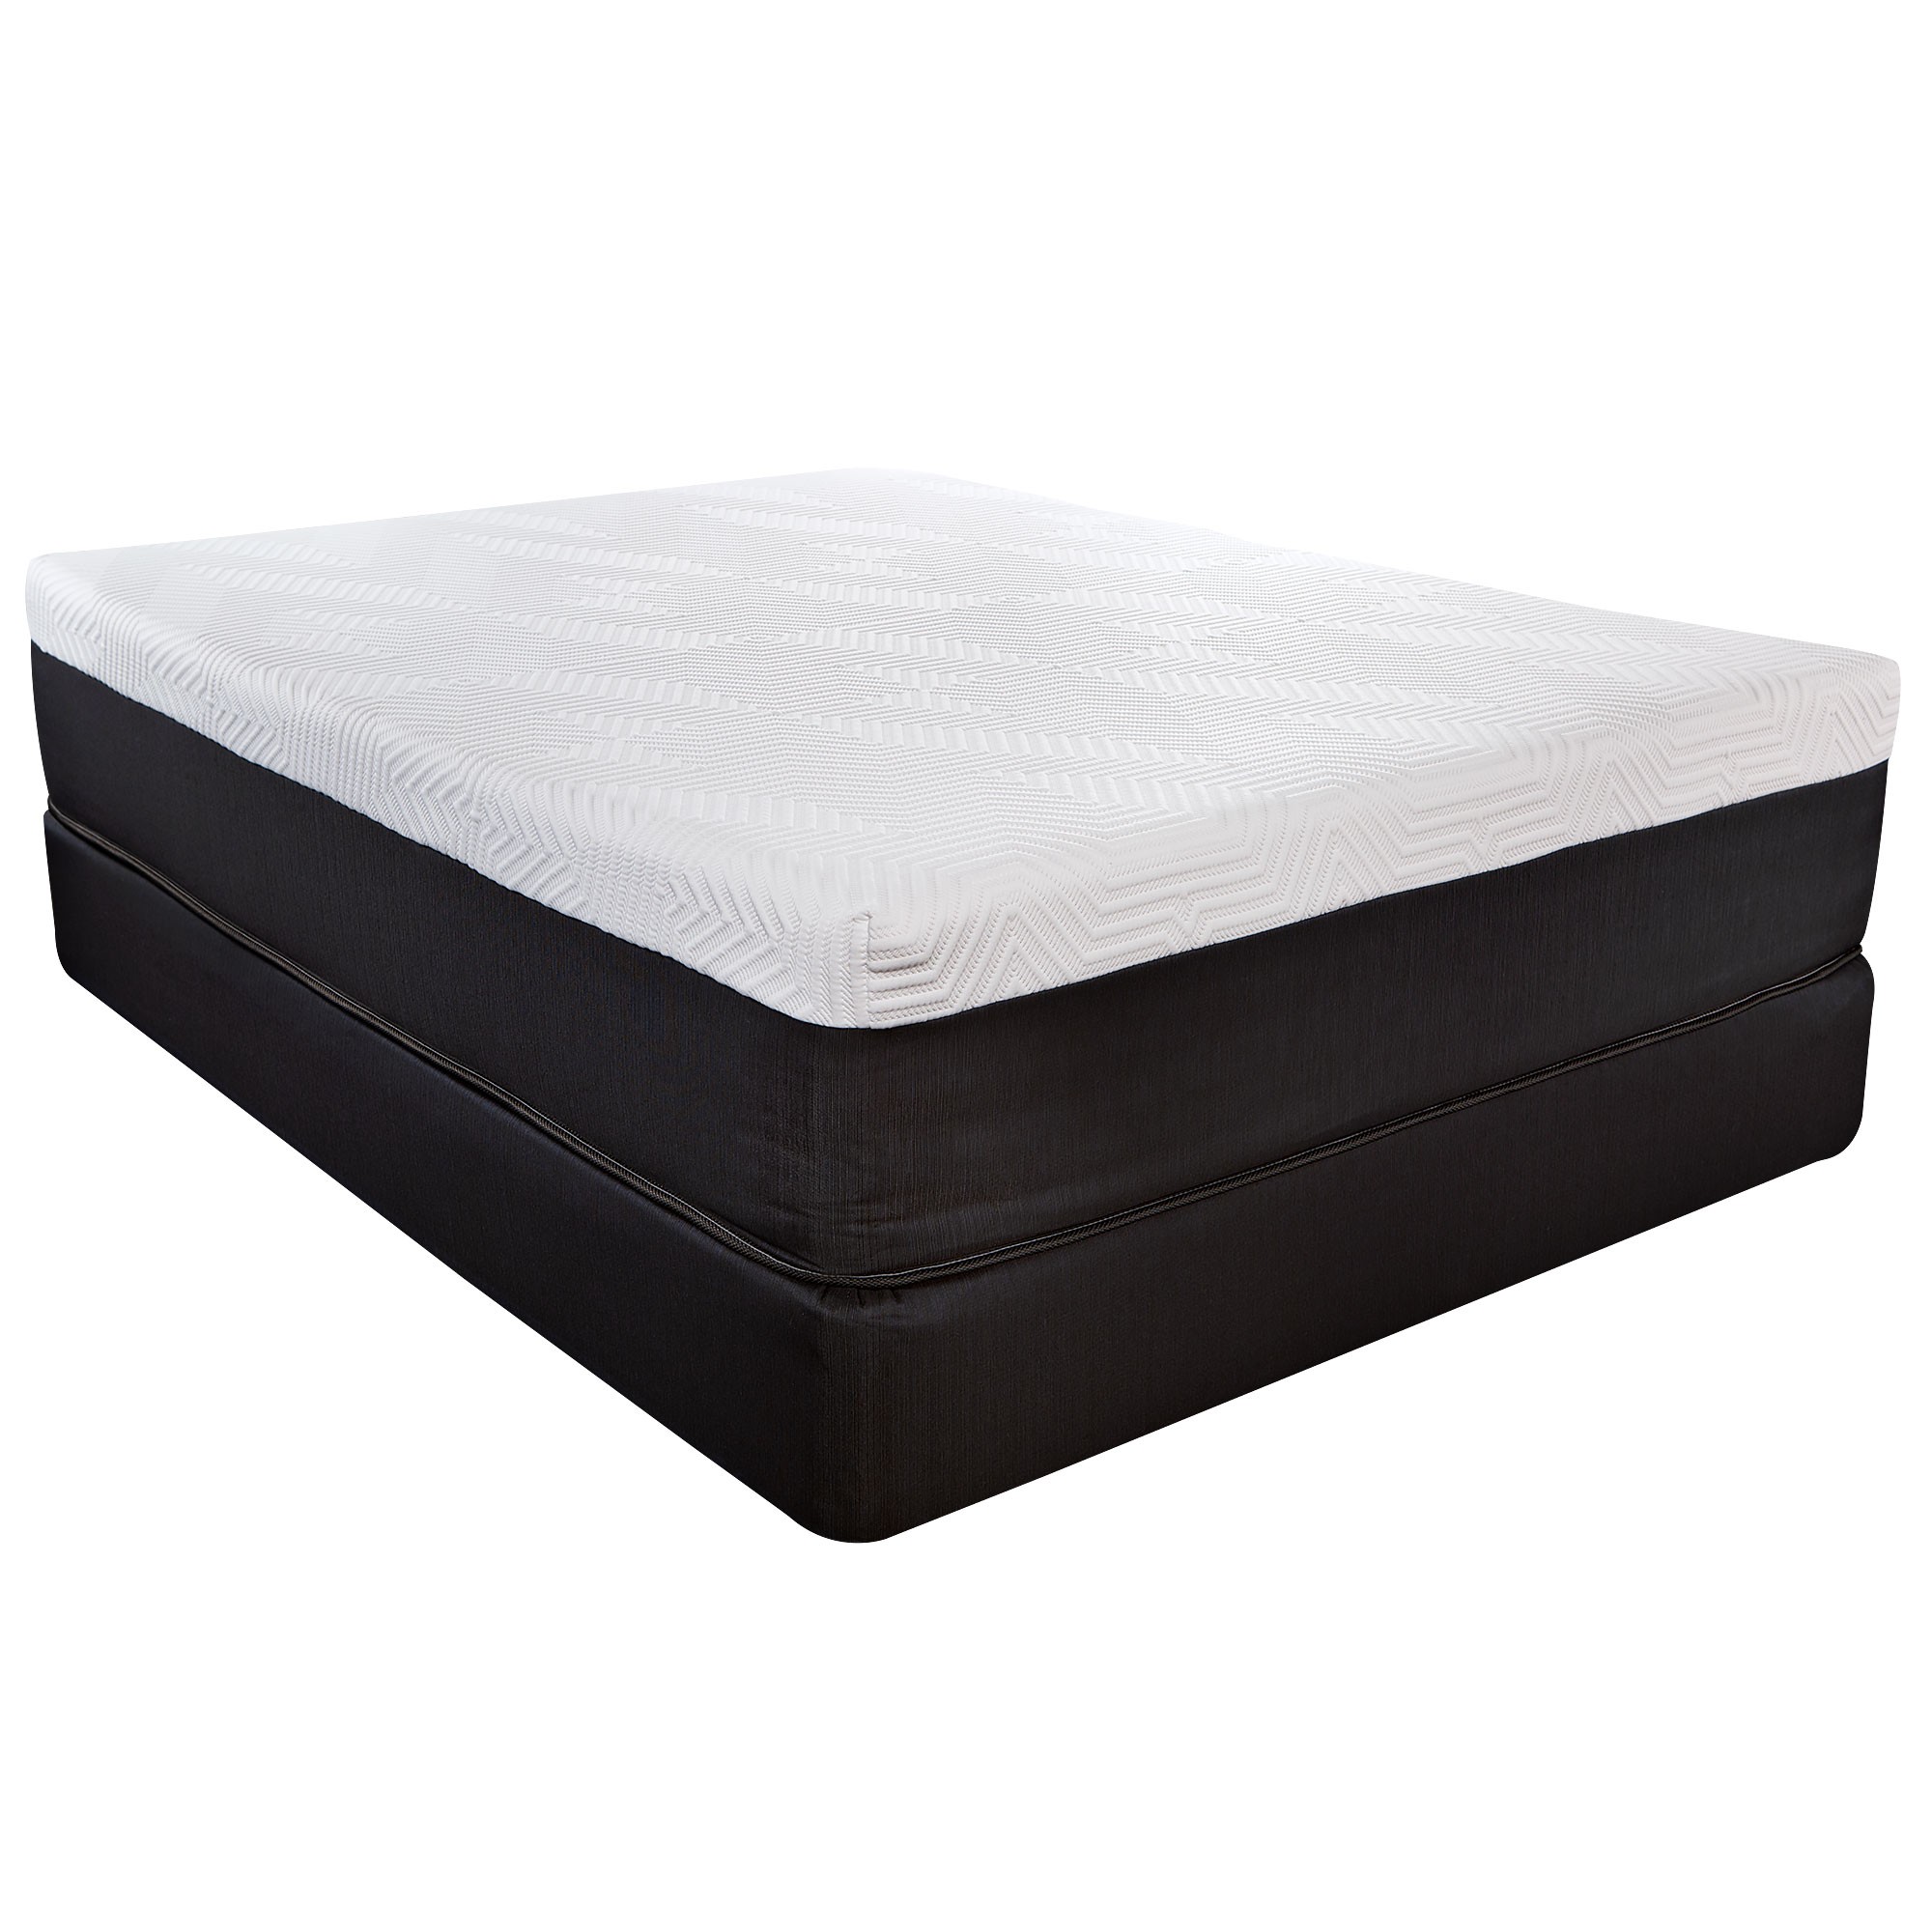 14" Hybrid Lux Memory Foam And Wrapped Coil Mattress Queen-391686-1